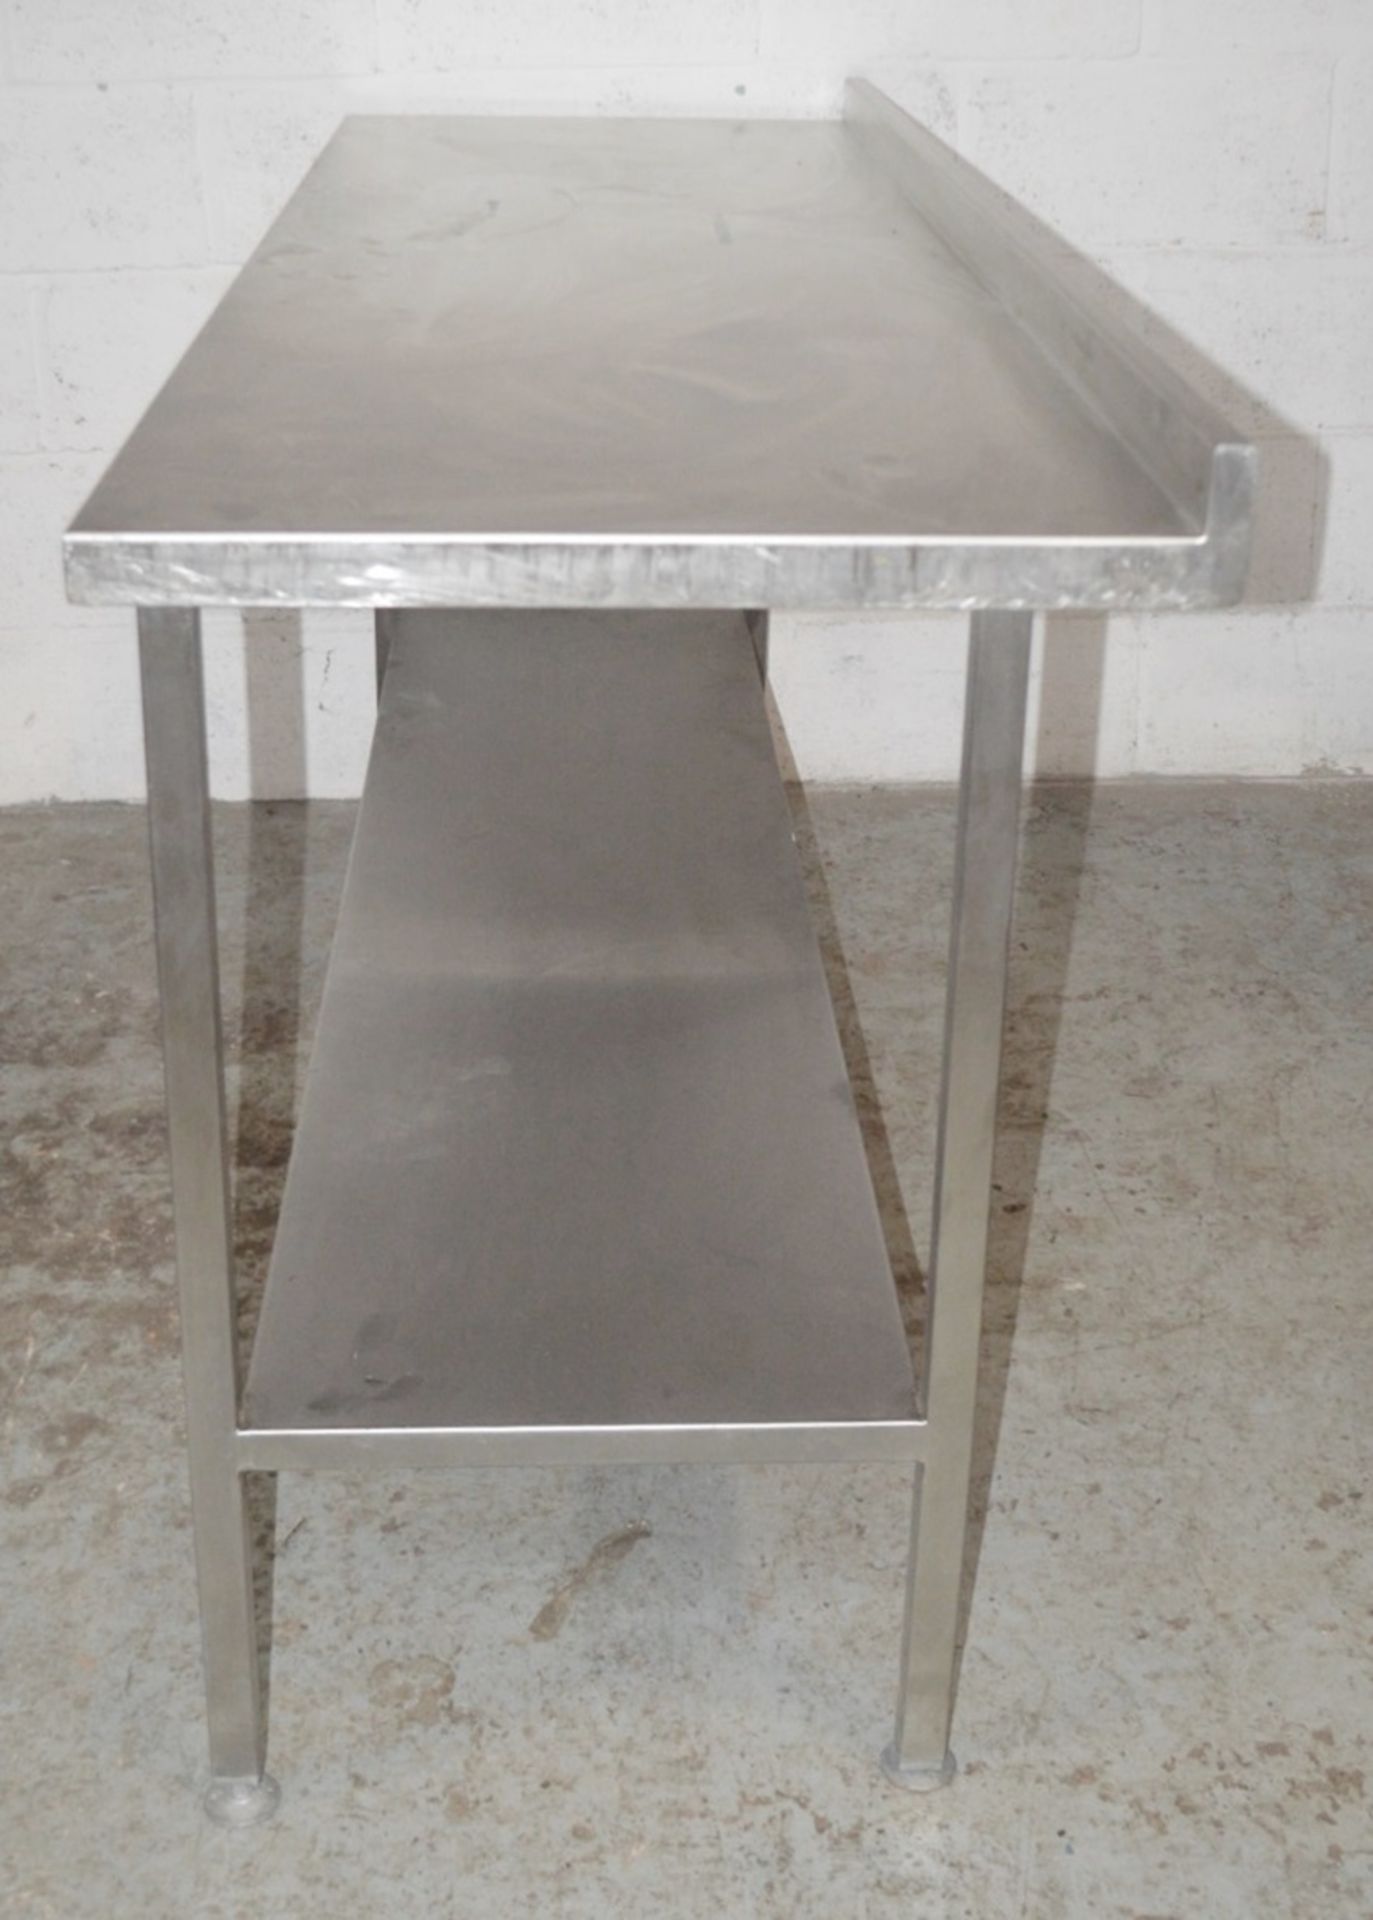 1 x Stainless Steel Long Commercial Kitchen Prep Bench With Upstand - Dimensions: H90 x W180 x D60cm - Image 3 of 4